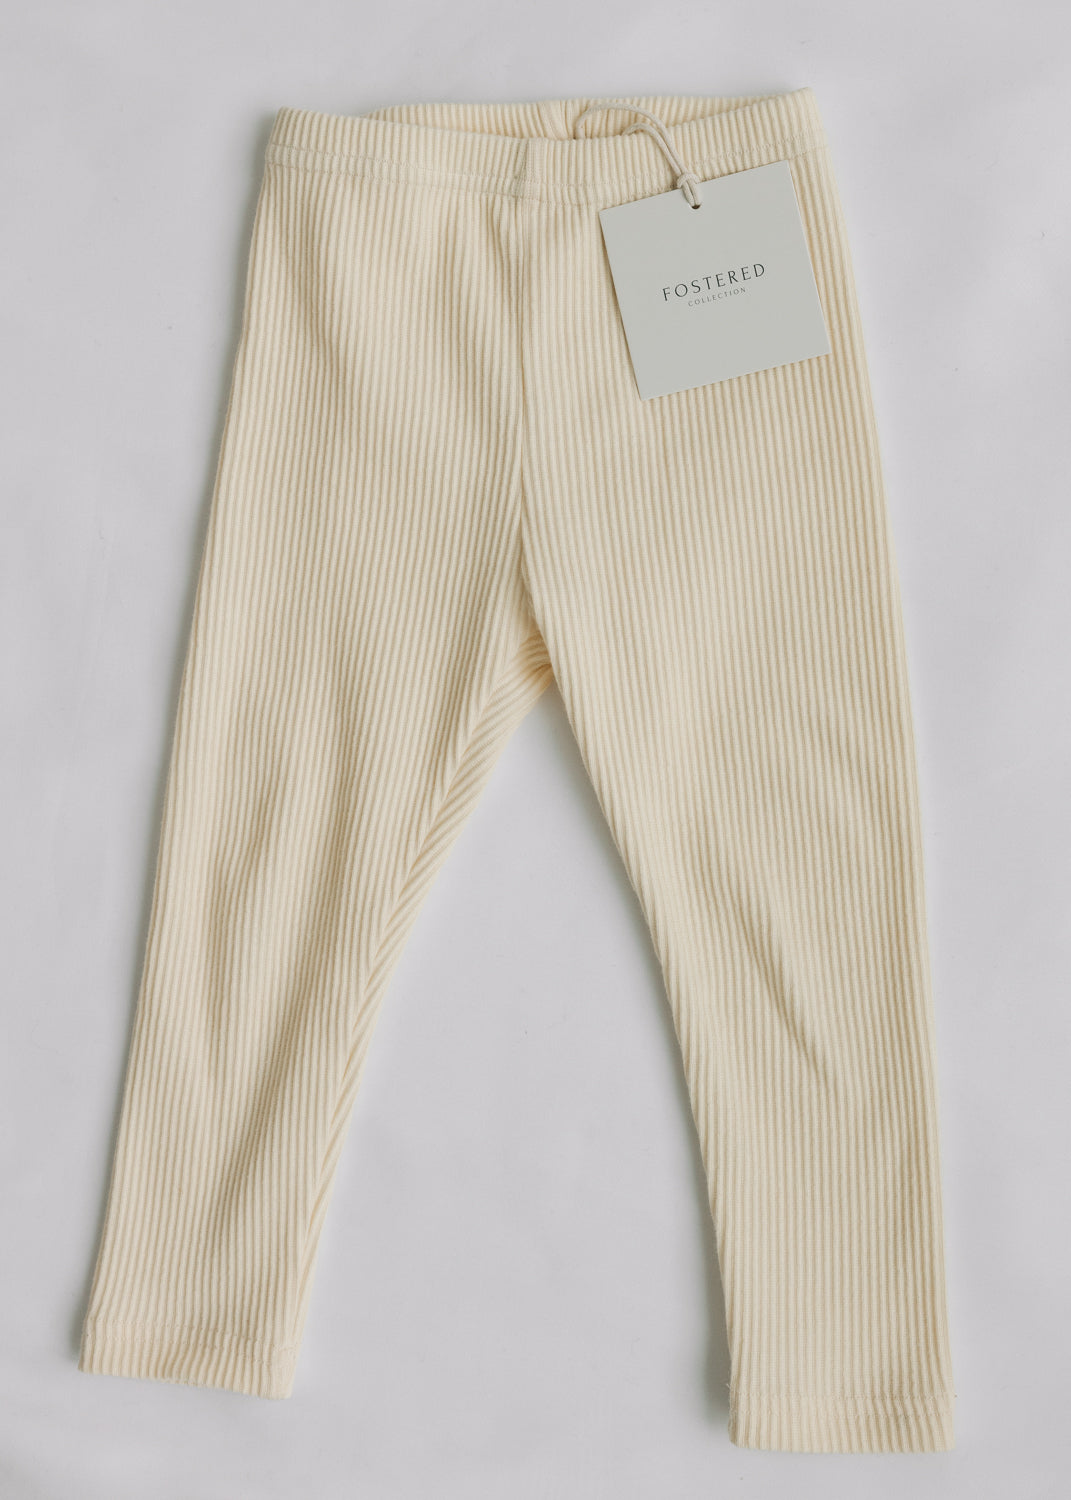  Fostered Collection Ribbed Leggings